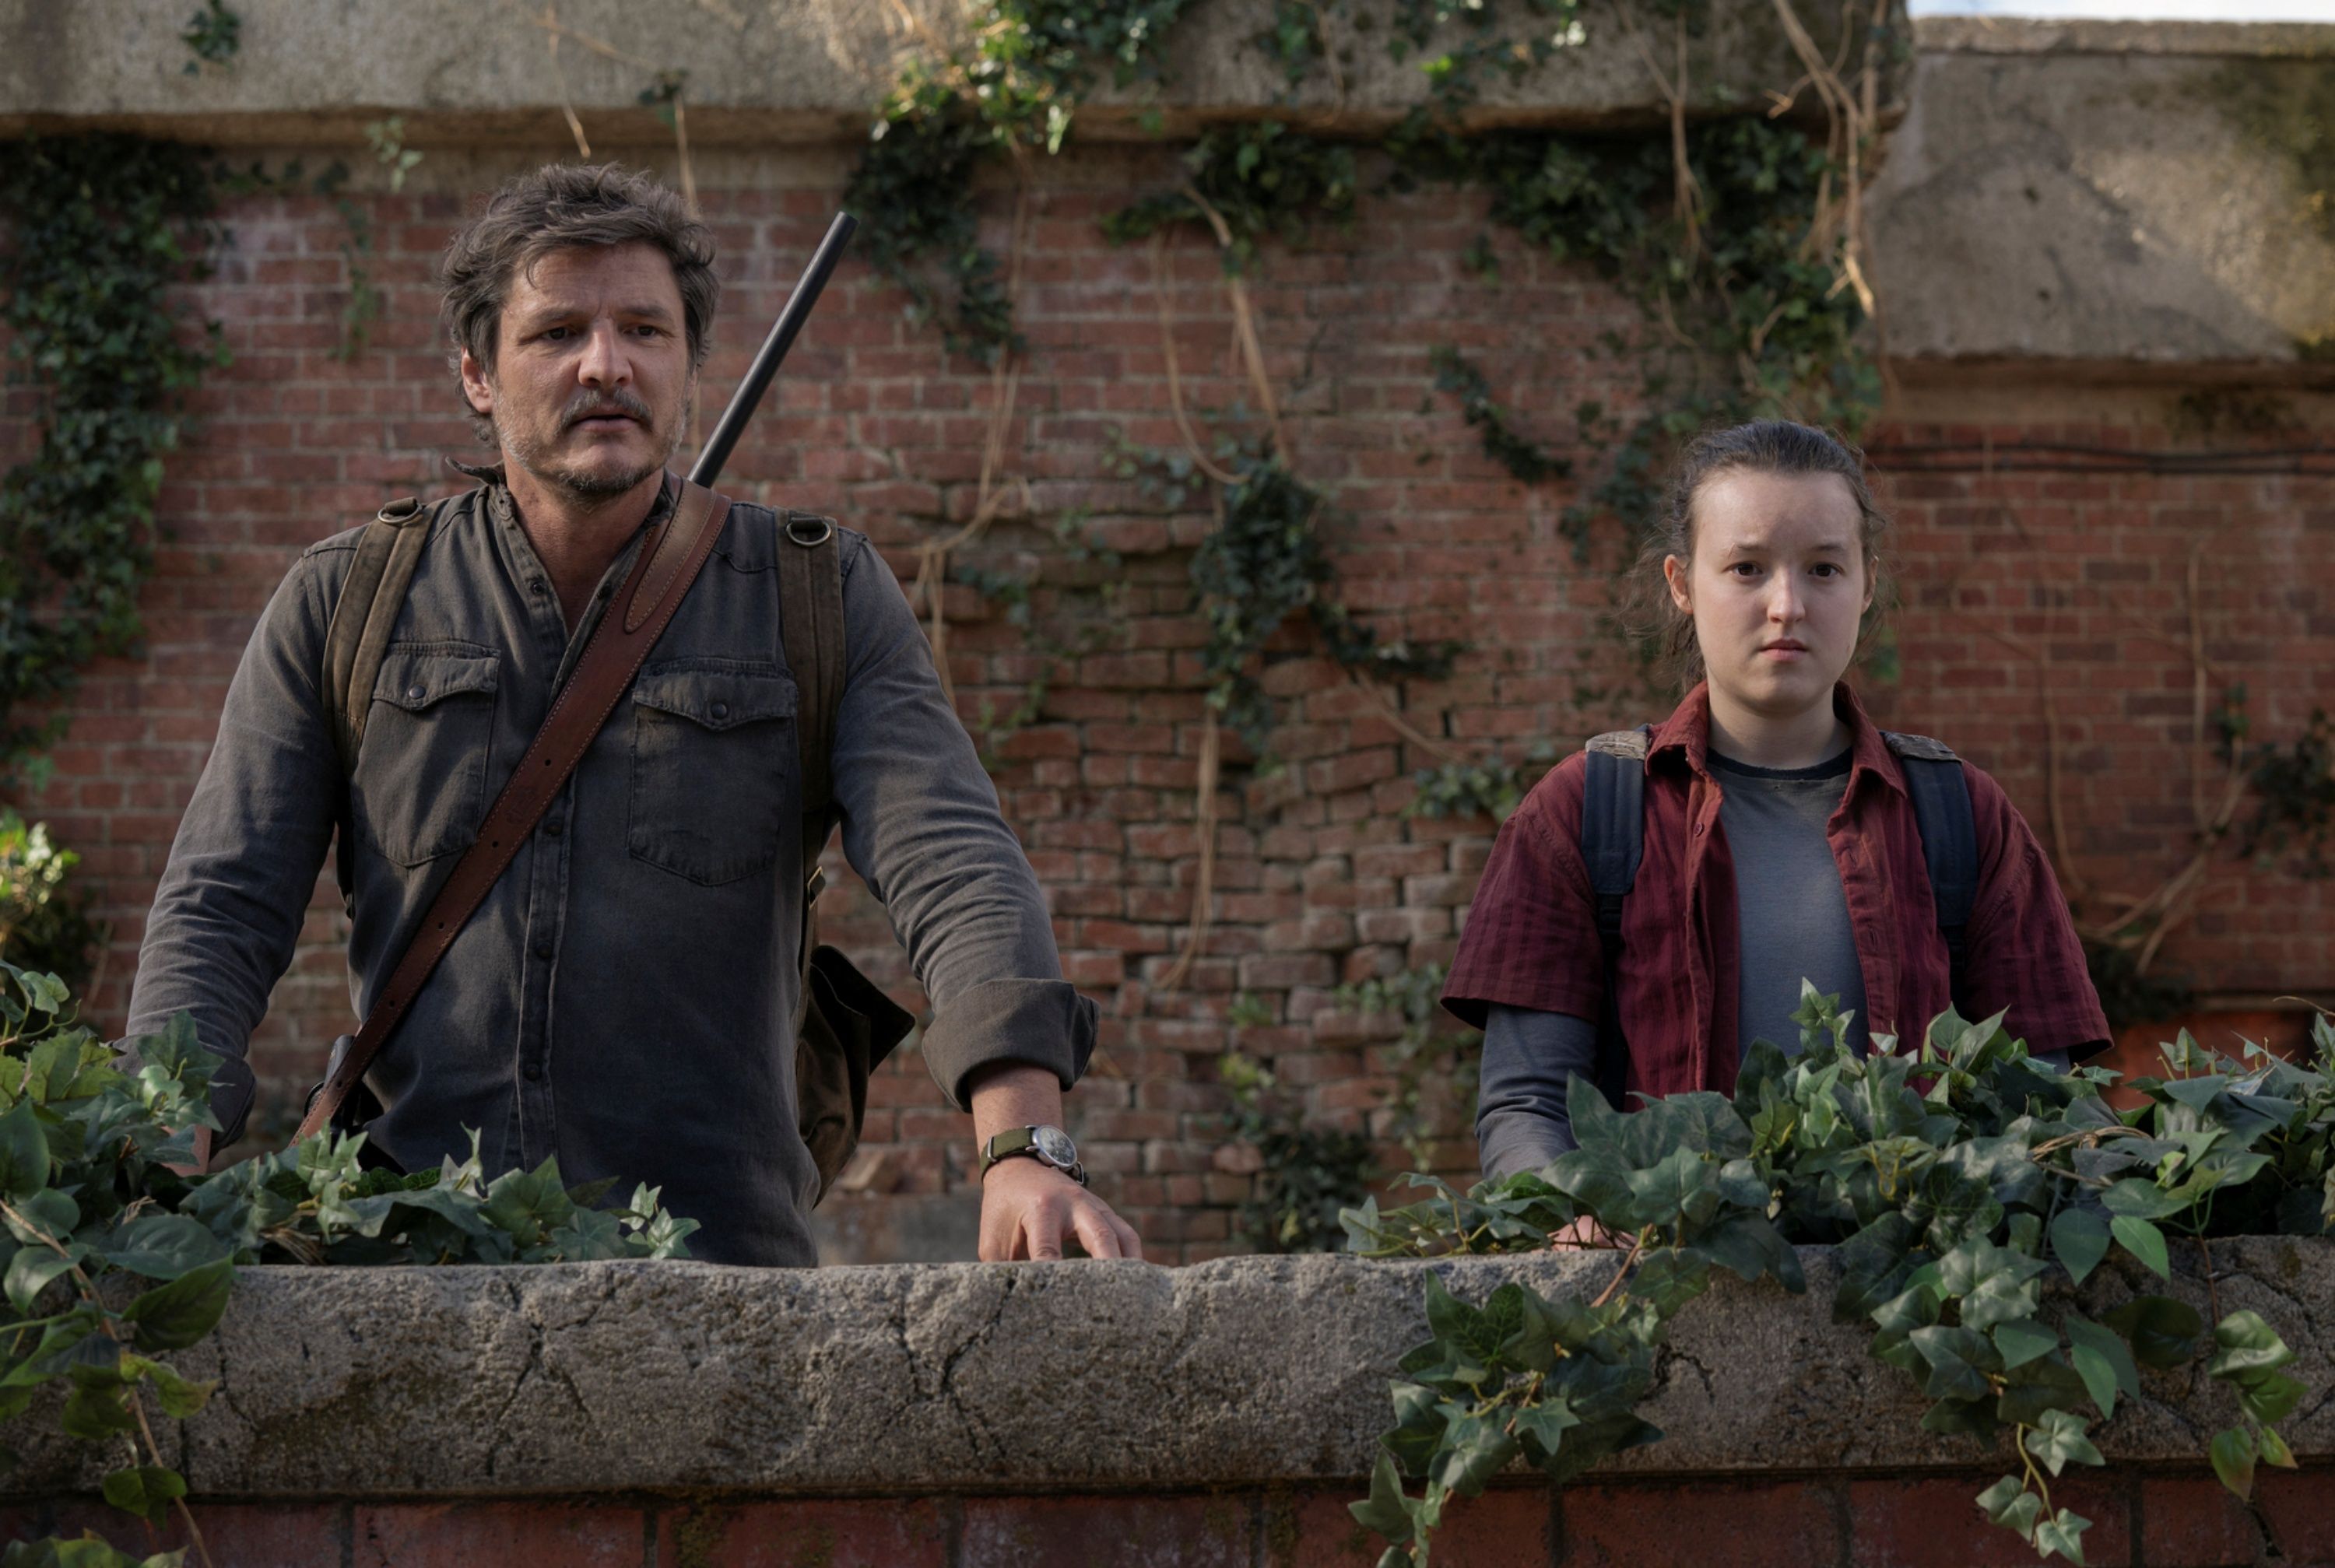 Pedro Pascal as Joel and Bella Ramsey as Ellie in Season 1 Episode 9 of The Last of Us